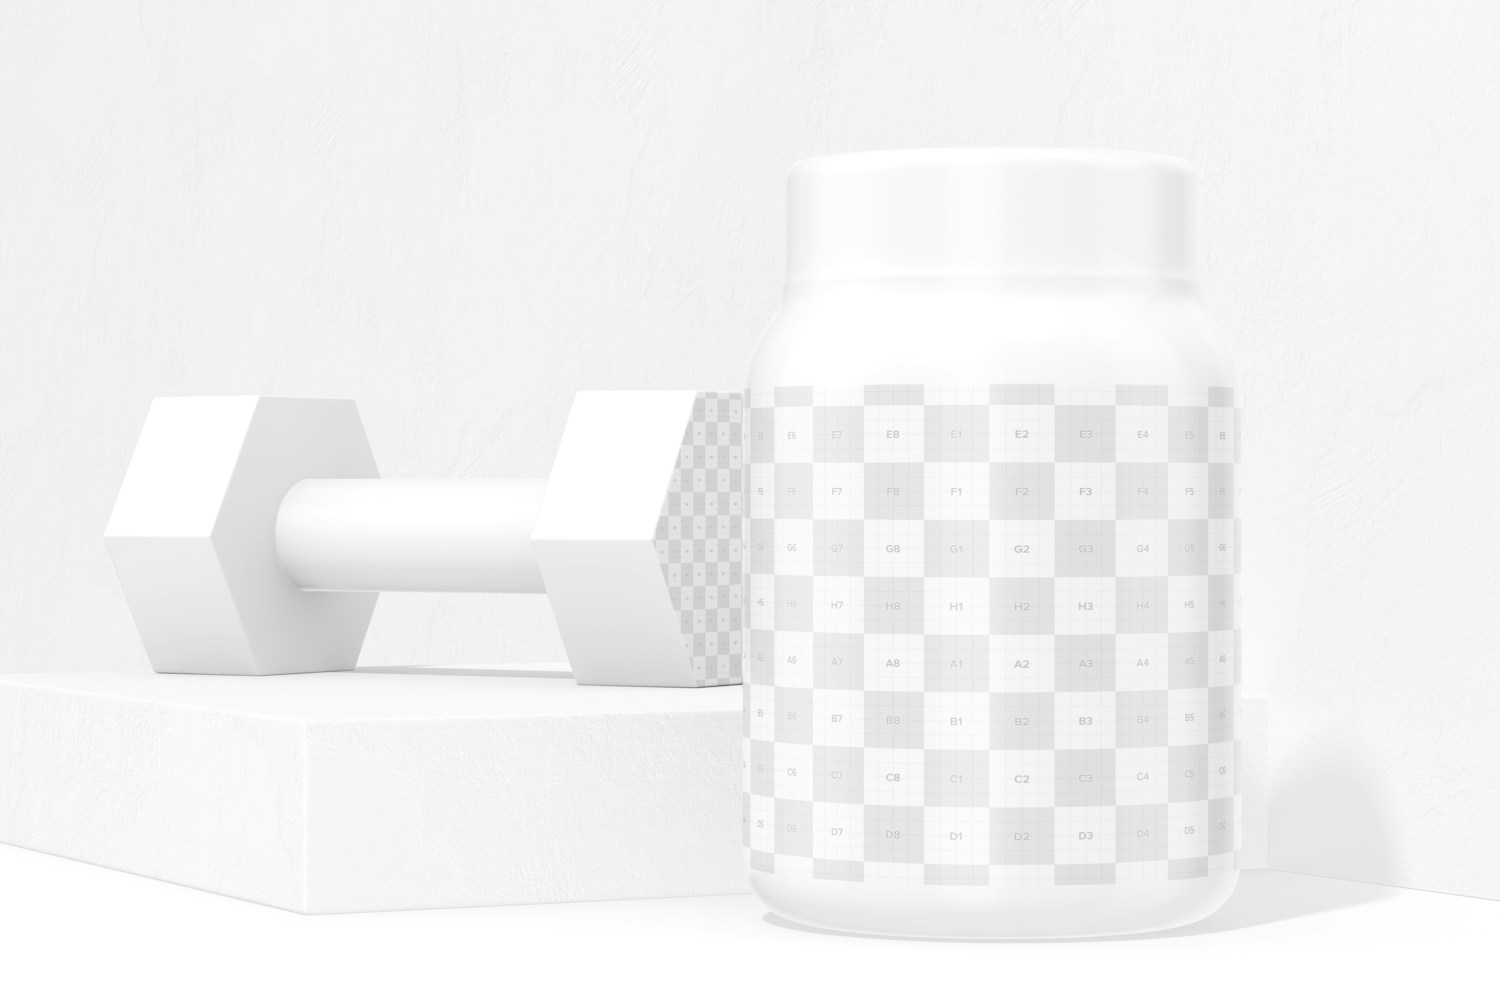 20 gr Protein Powder Container Mockup, Right View